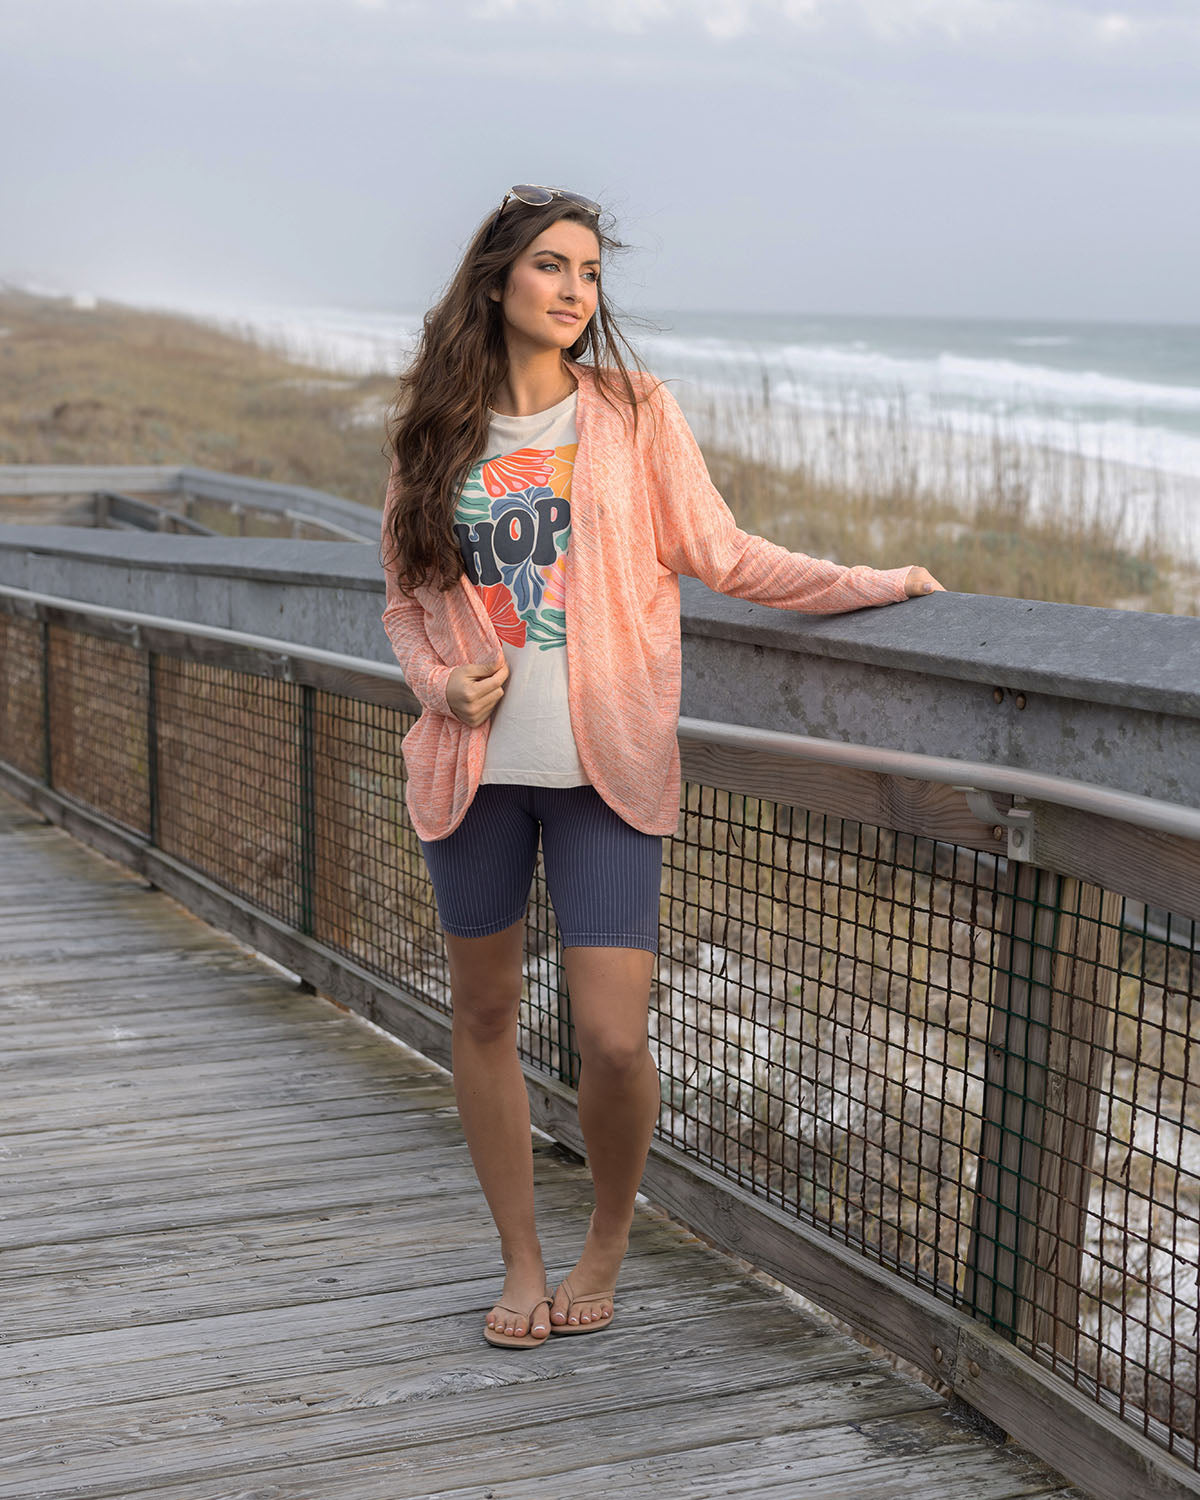 Airy Cocoon Slub Cardigan in Dreamsicle - FINAL SALE - Grace and Lace